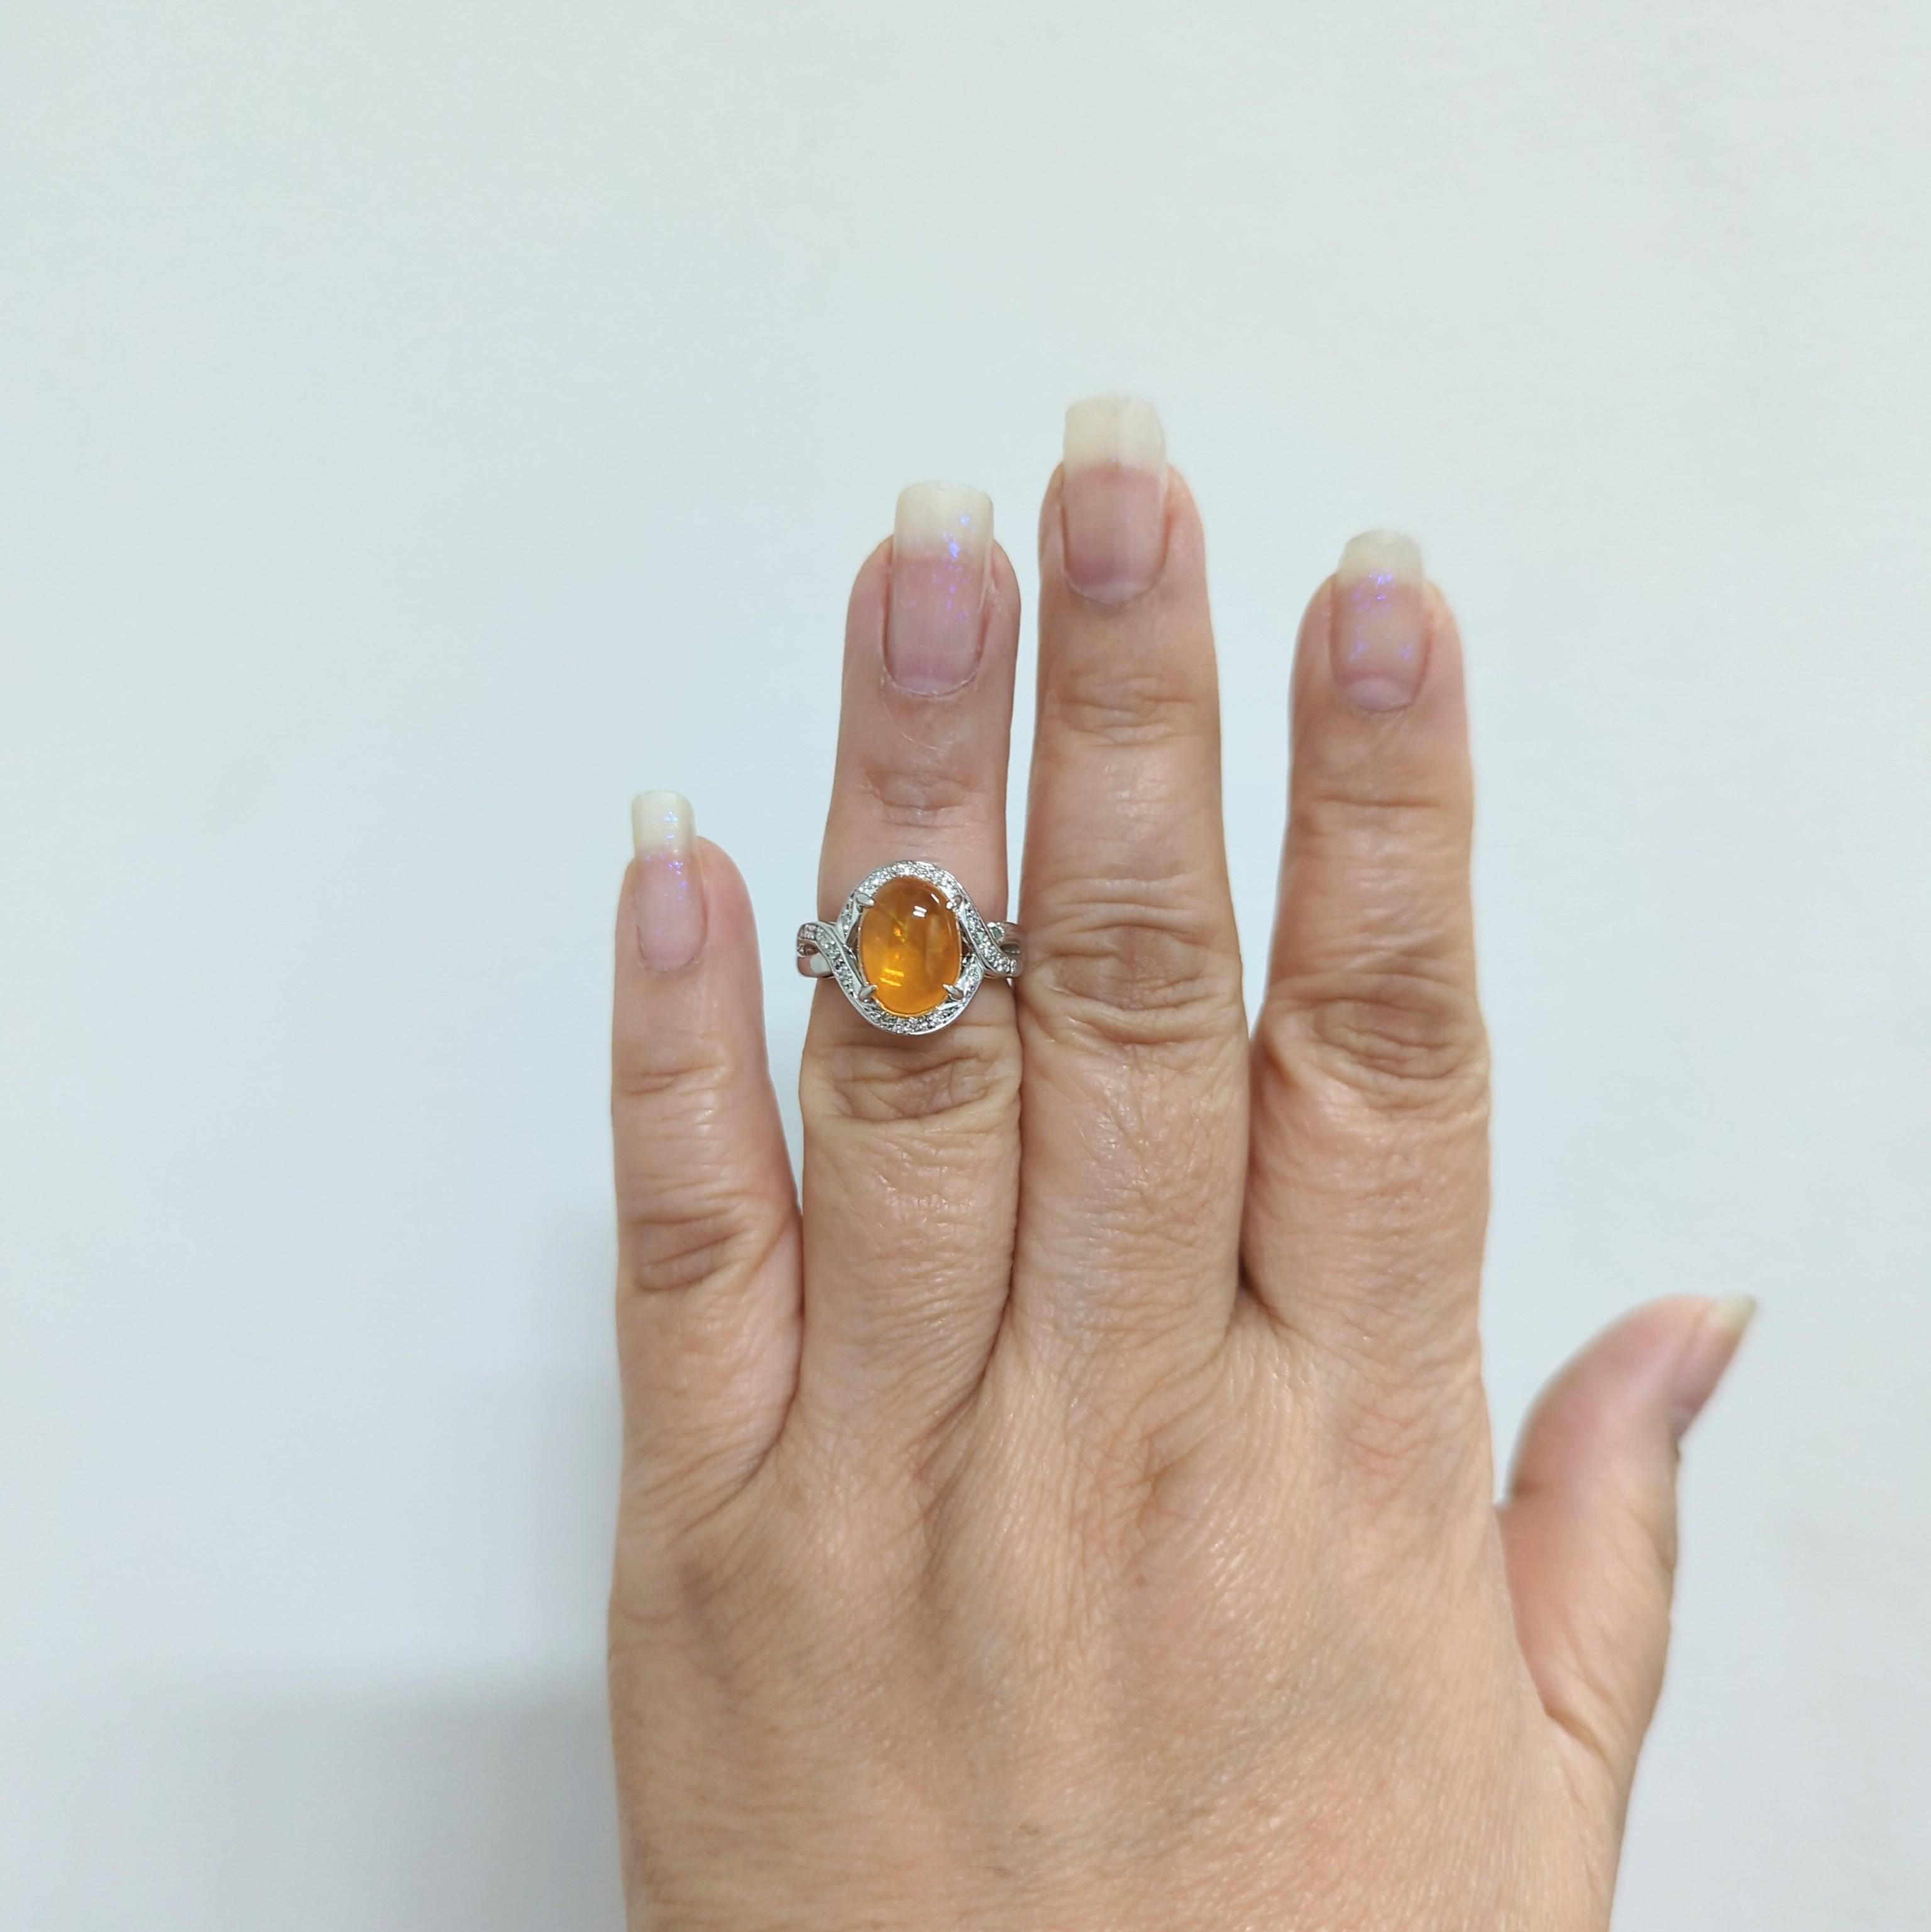 Beautiful 2.95 ct. fire opal oval cabochon with 0.14 ct. good quality white diamond rounds.  Handmade in platinum.  Ring size 5.75.